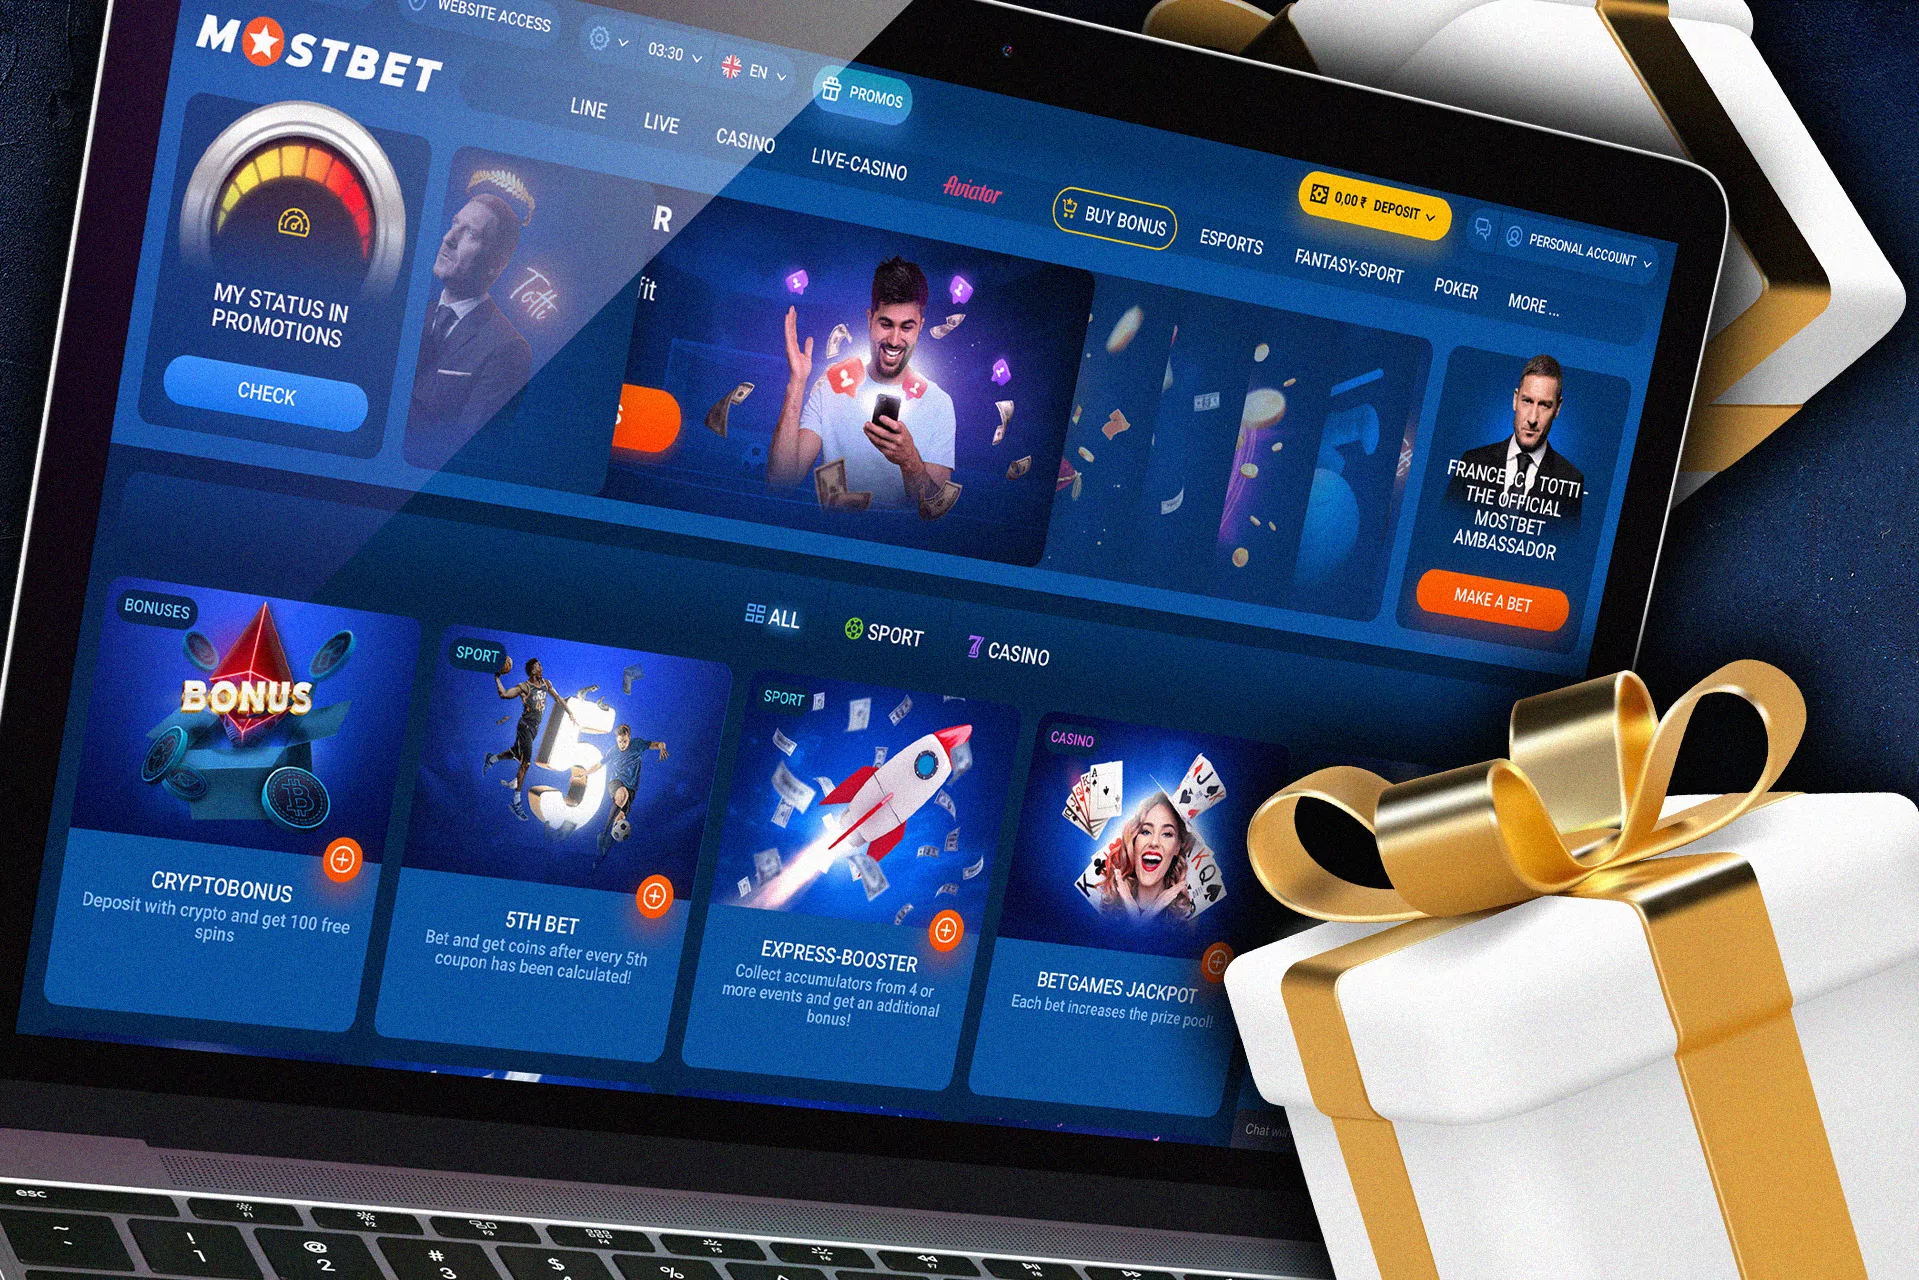 Mostbet offers a lot of bonuses for both new and regular players.